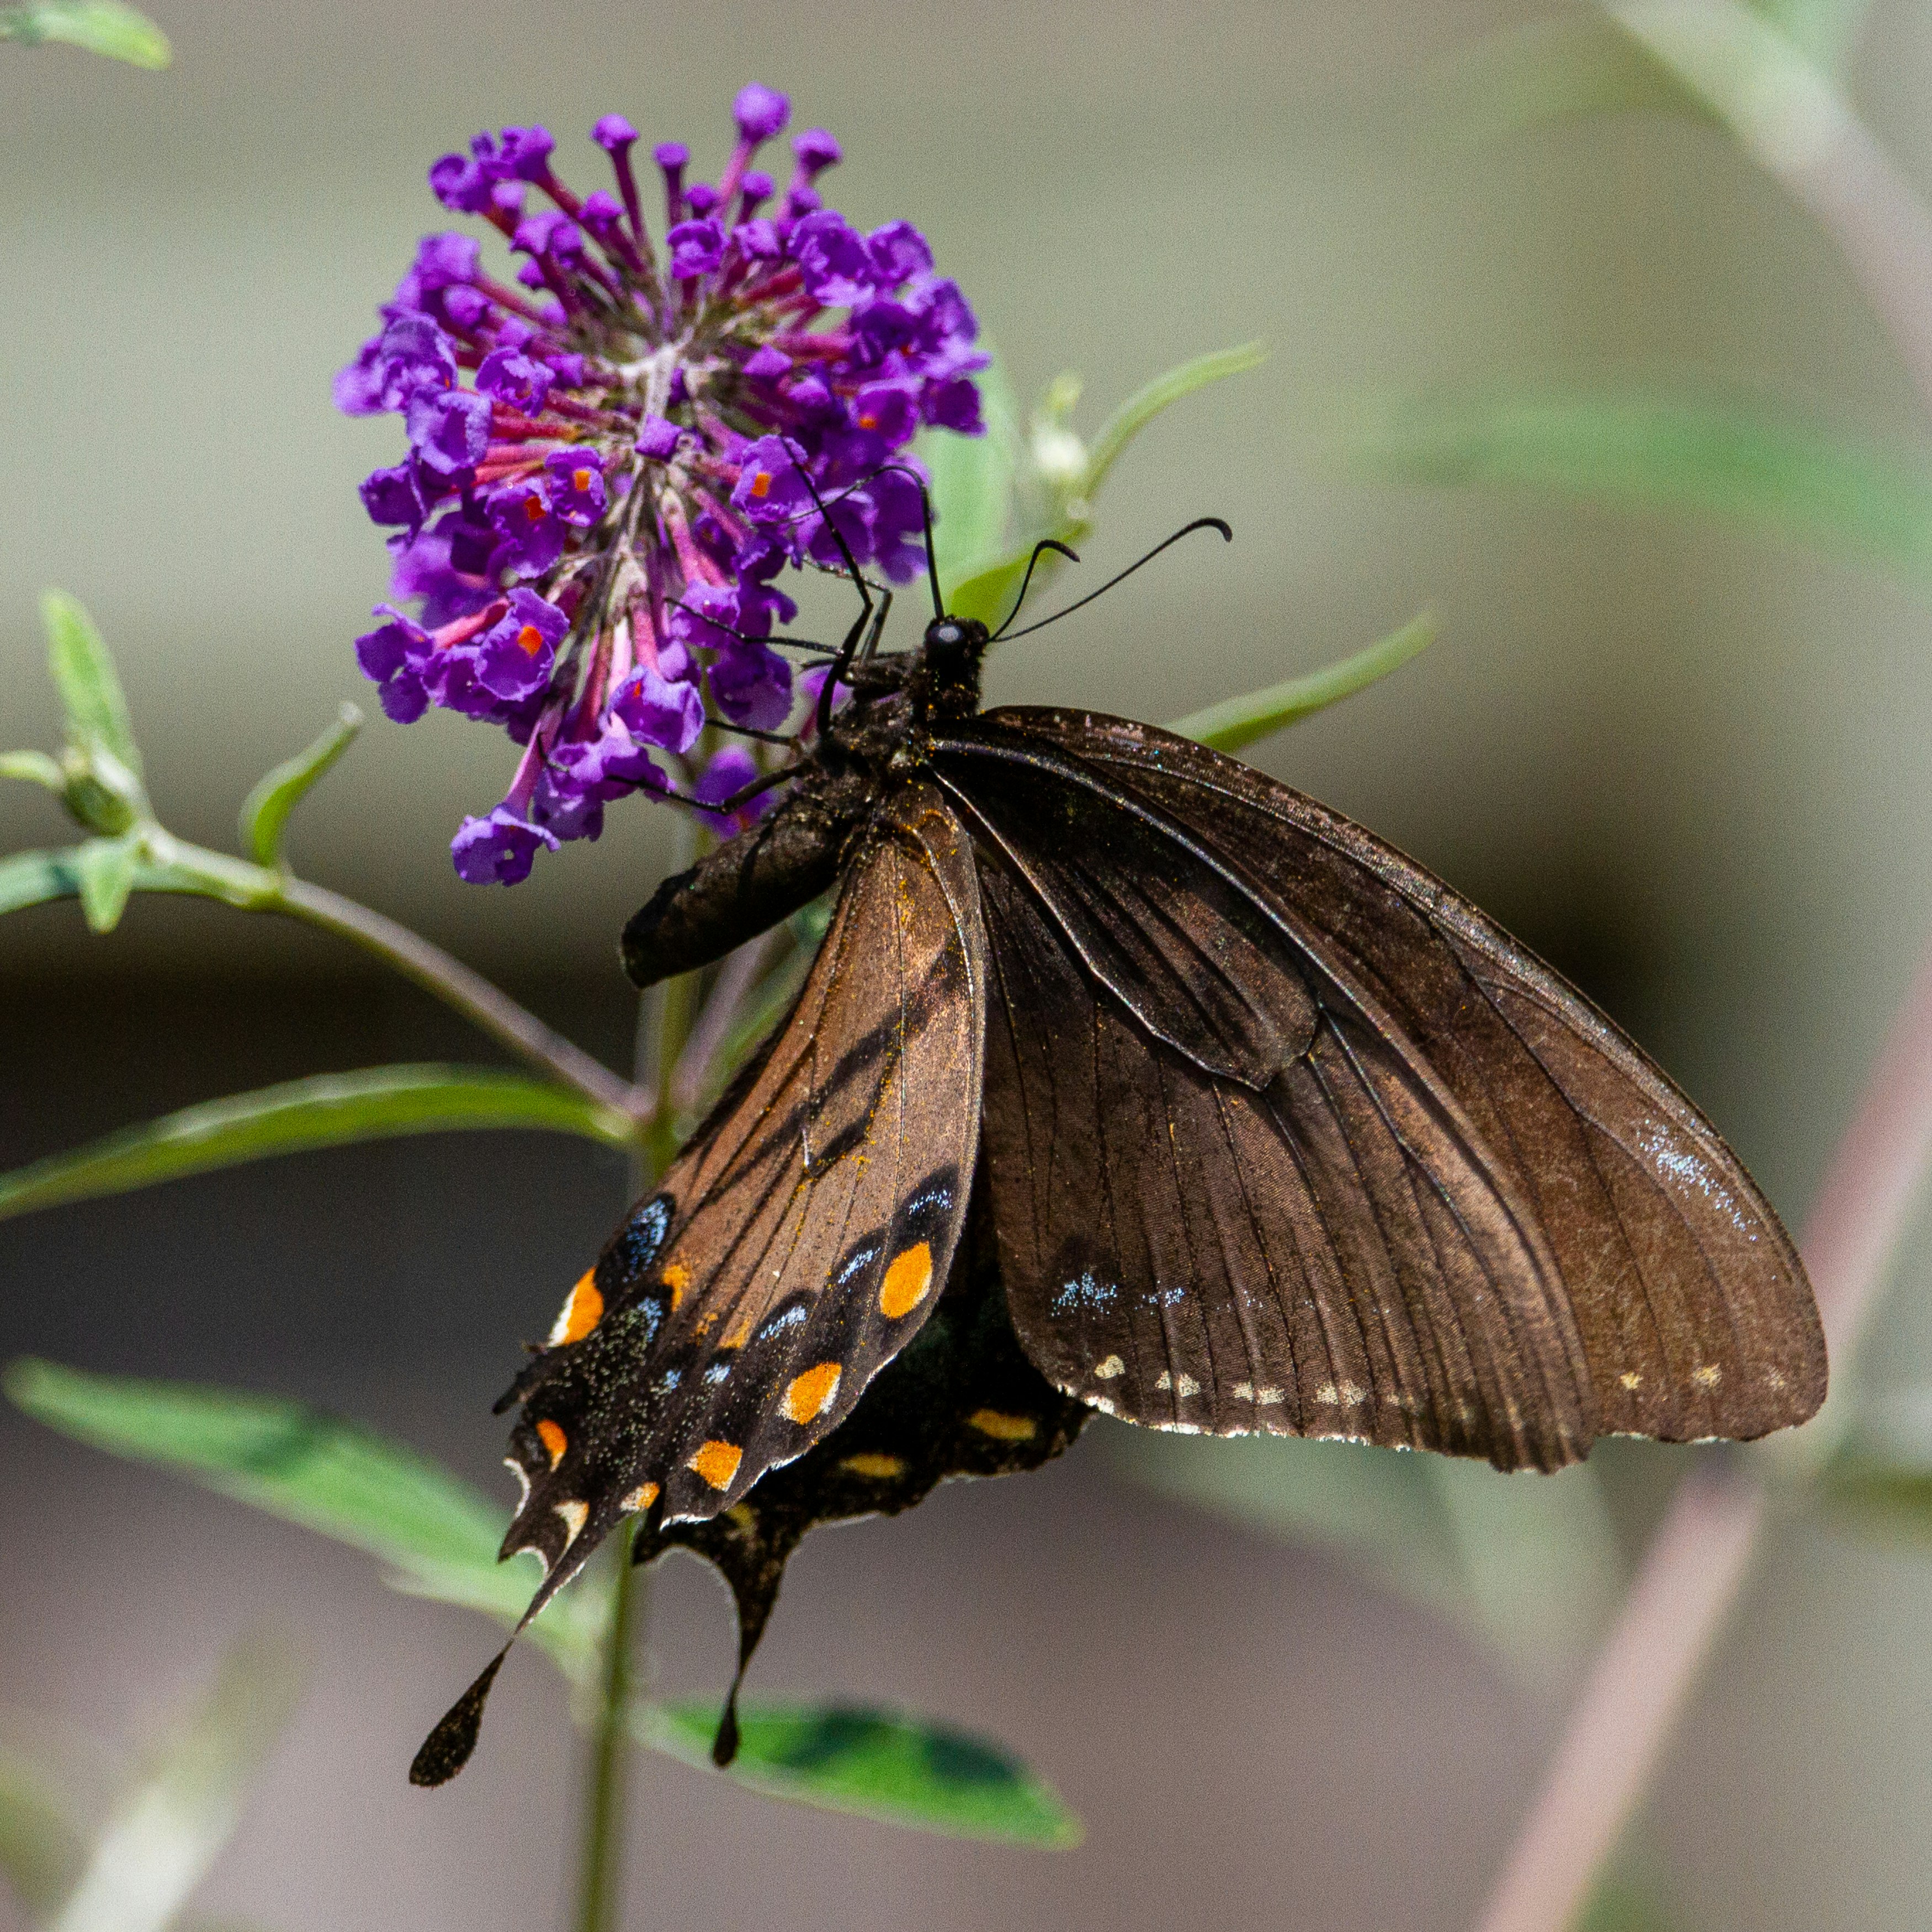 An eastern tiger swallowtail (ventral female, dark morph) butterfly on the bloom of a butterfly bush.